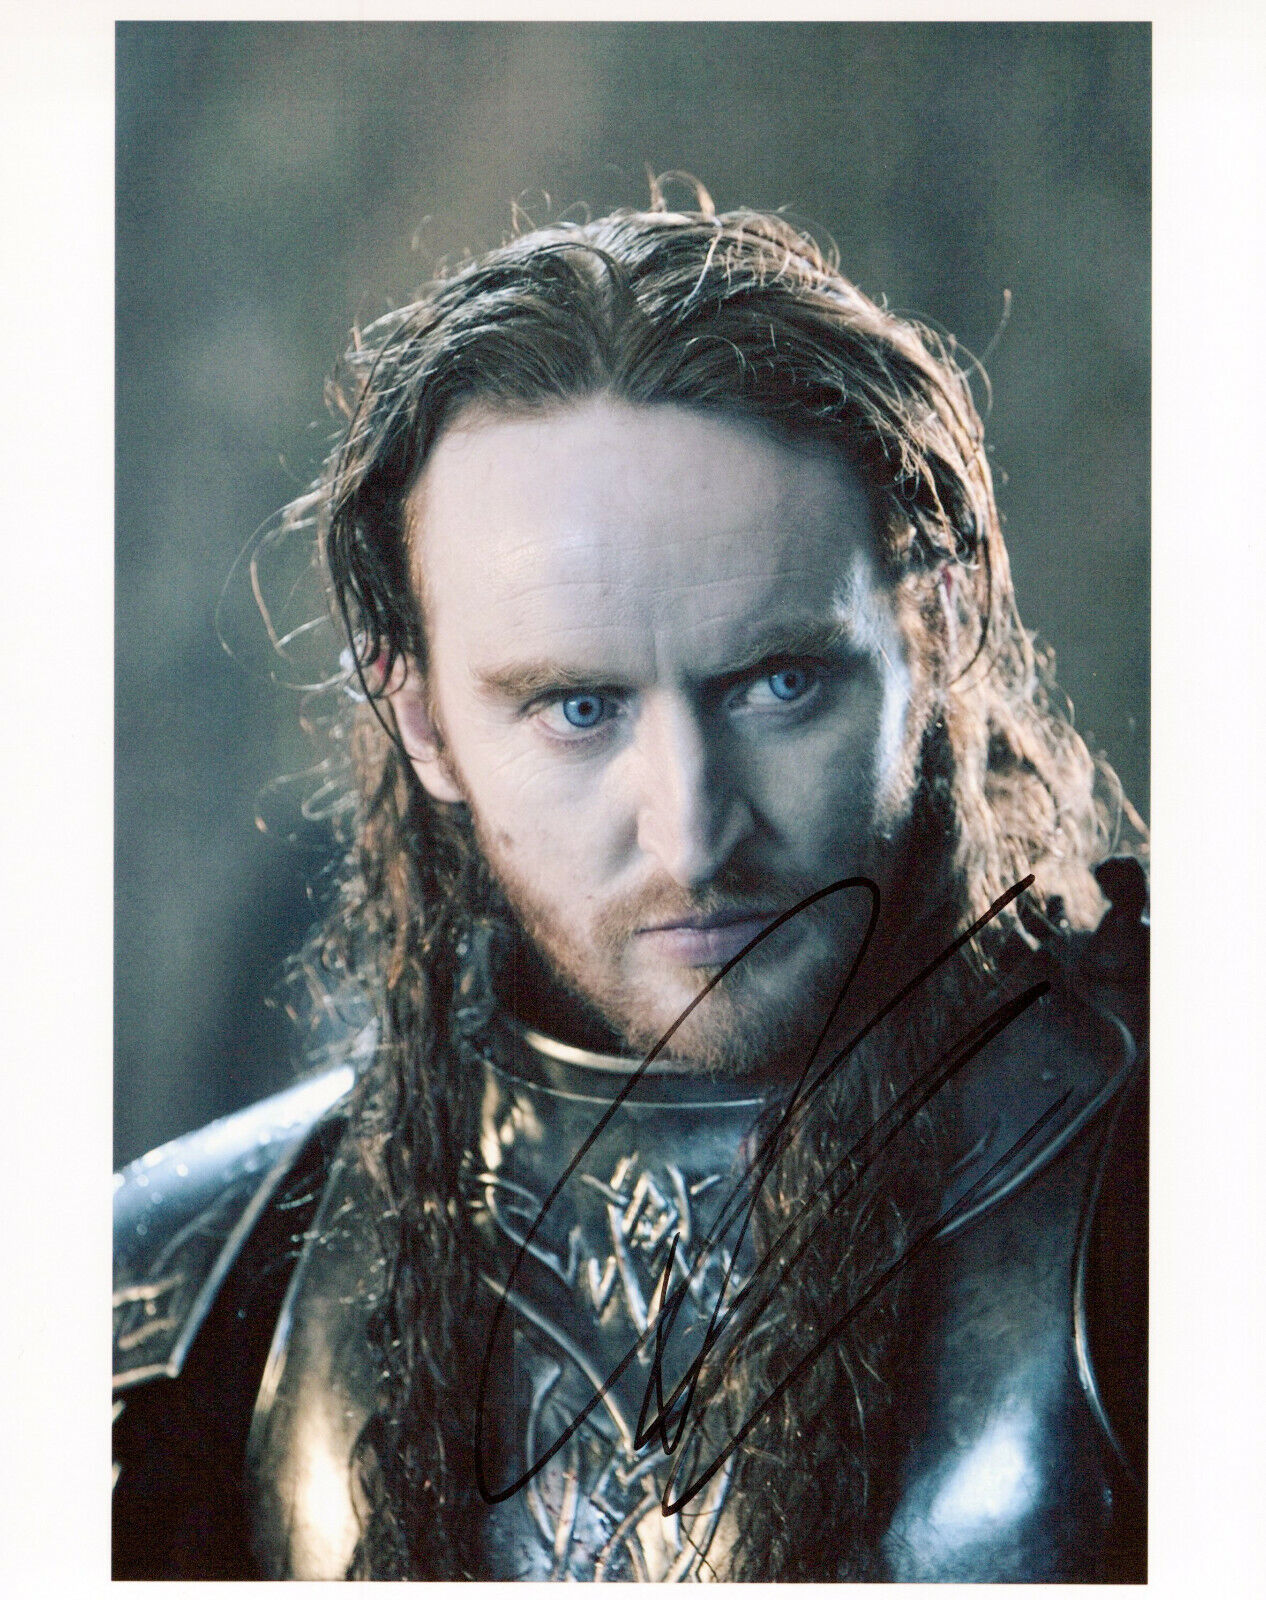 Tony Curran Underworld Evolution autographed Photo Poster painting signed 8x10 #5 Marcus